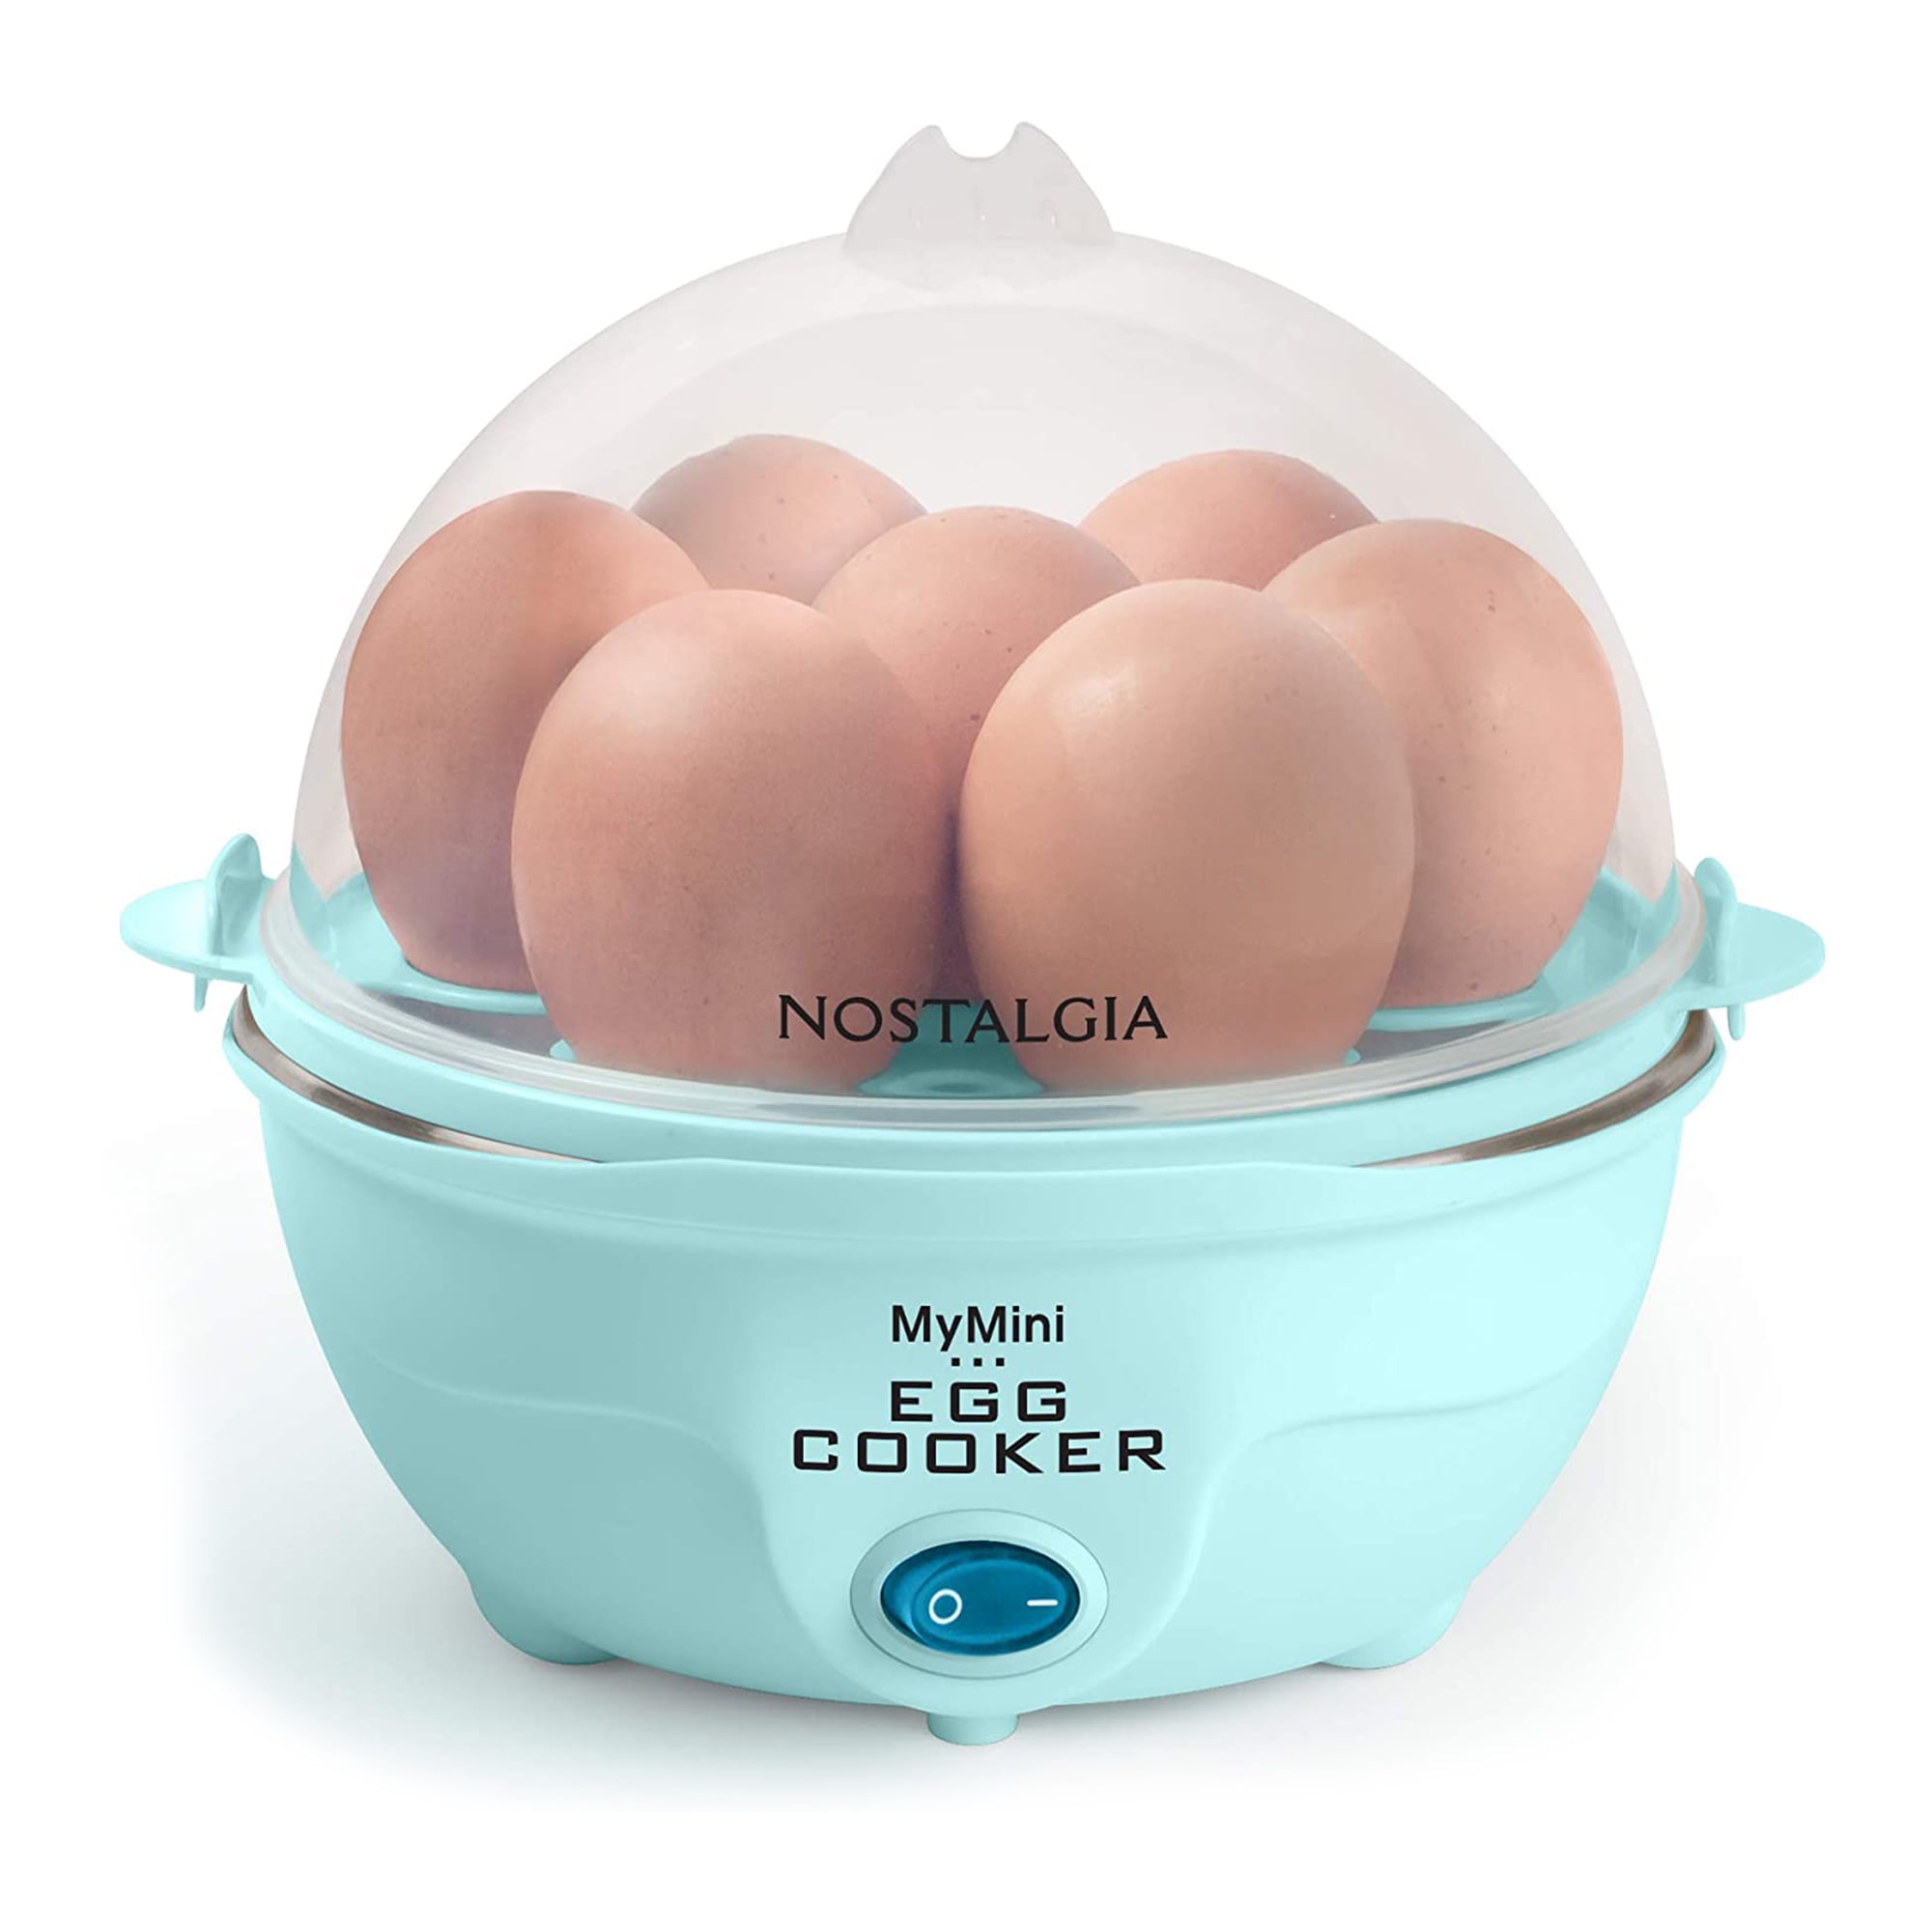 Bella's 7-Egg Cooker now $10 shipped + more from Dash, Mueller and Nostalgia